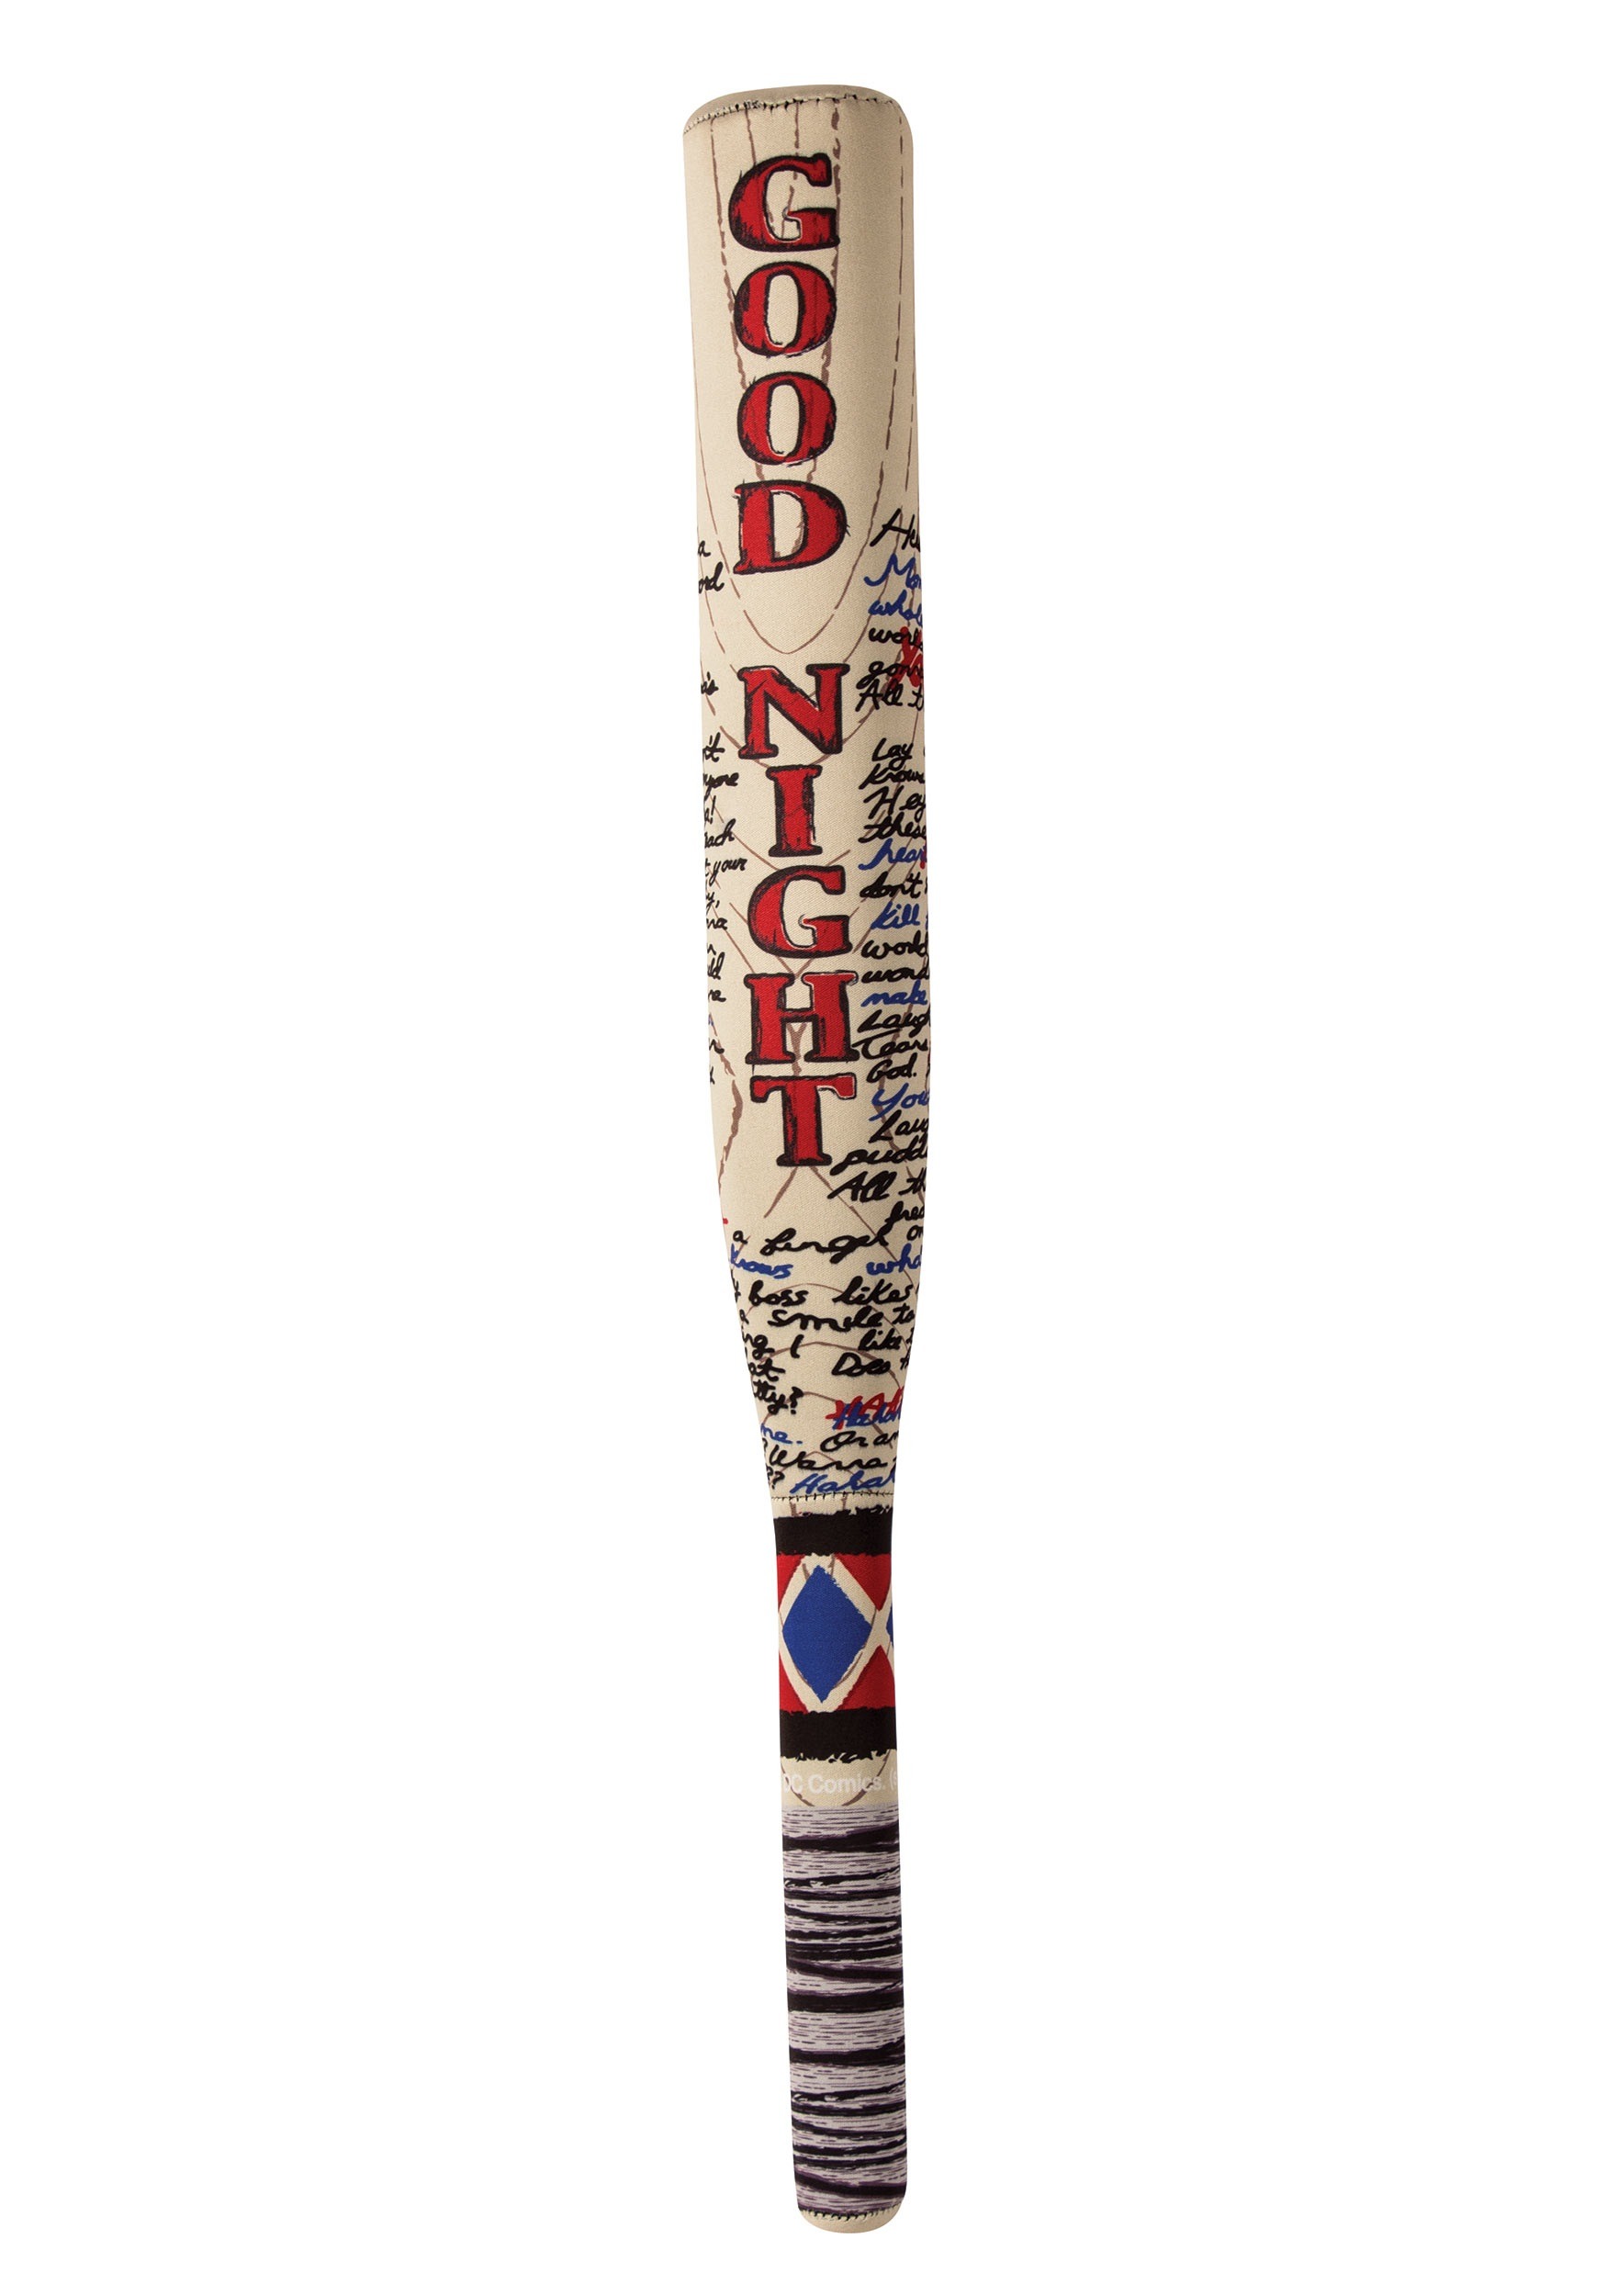 Suicide Squad Harley Quinn Inflatable Baseball Bat Weapon Toy Prop DC Comics New